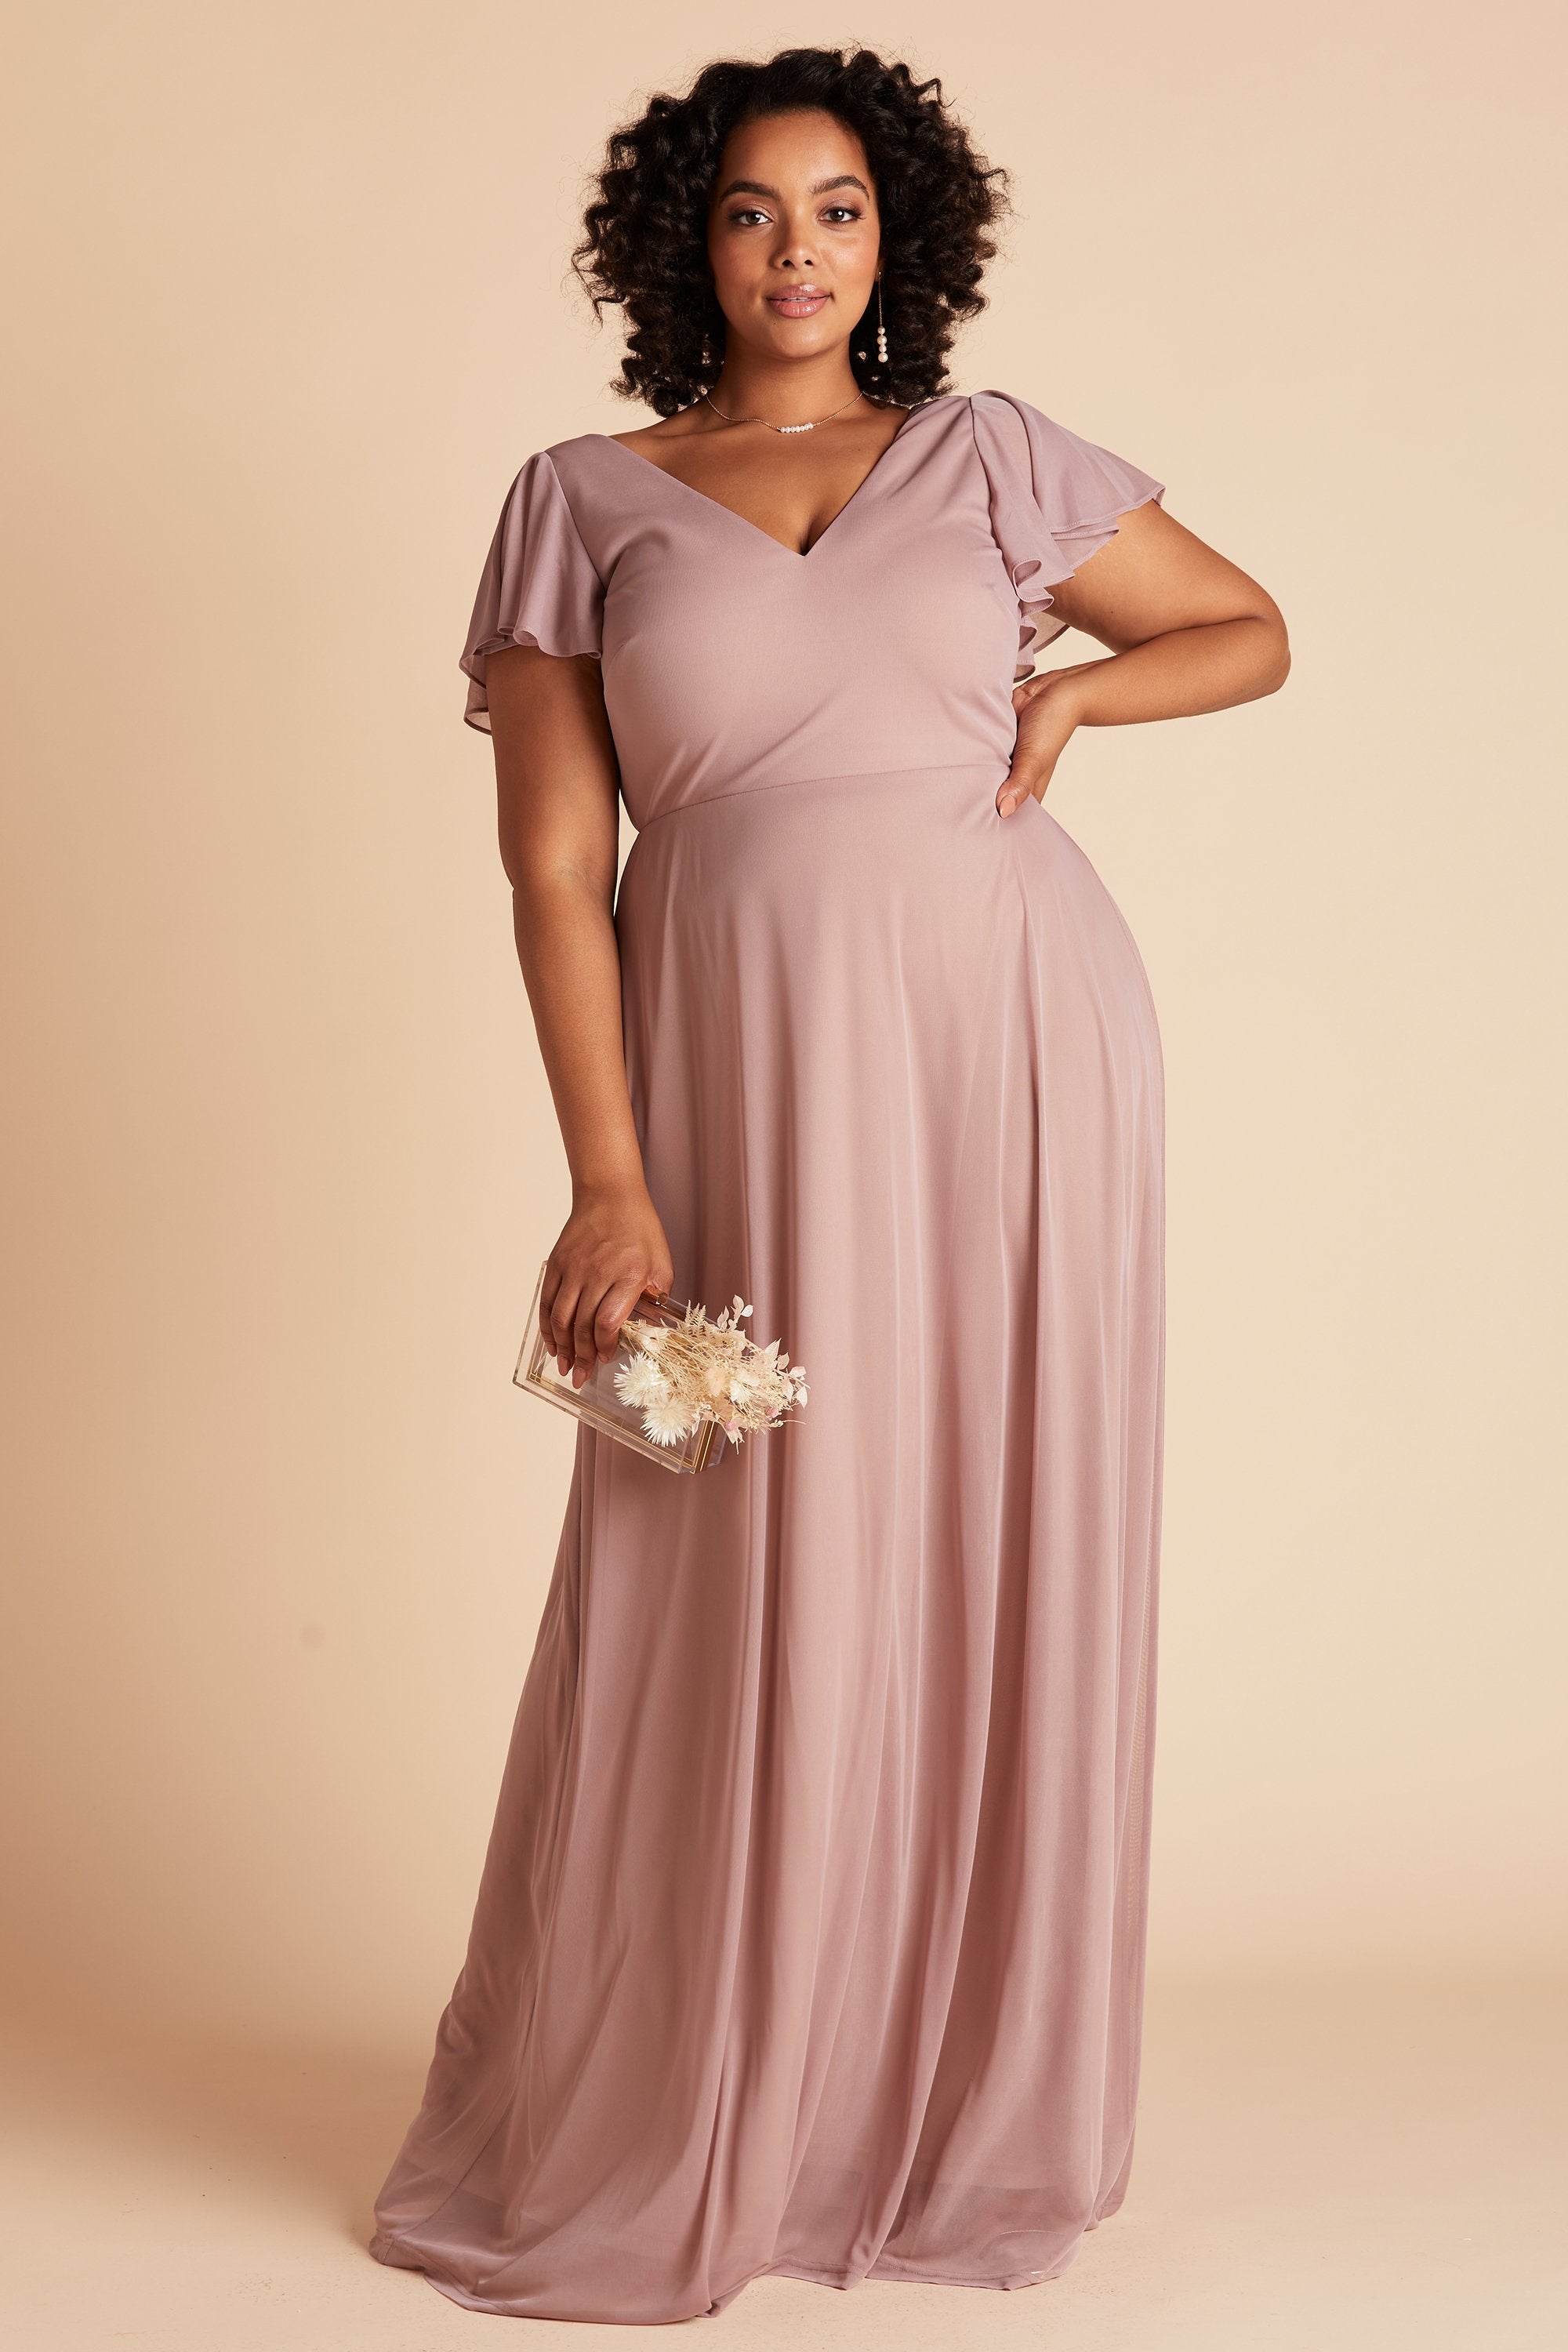 Hannah plus size bridesmaids dress in mauve mesh by Birdy Grey, front view